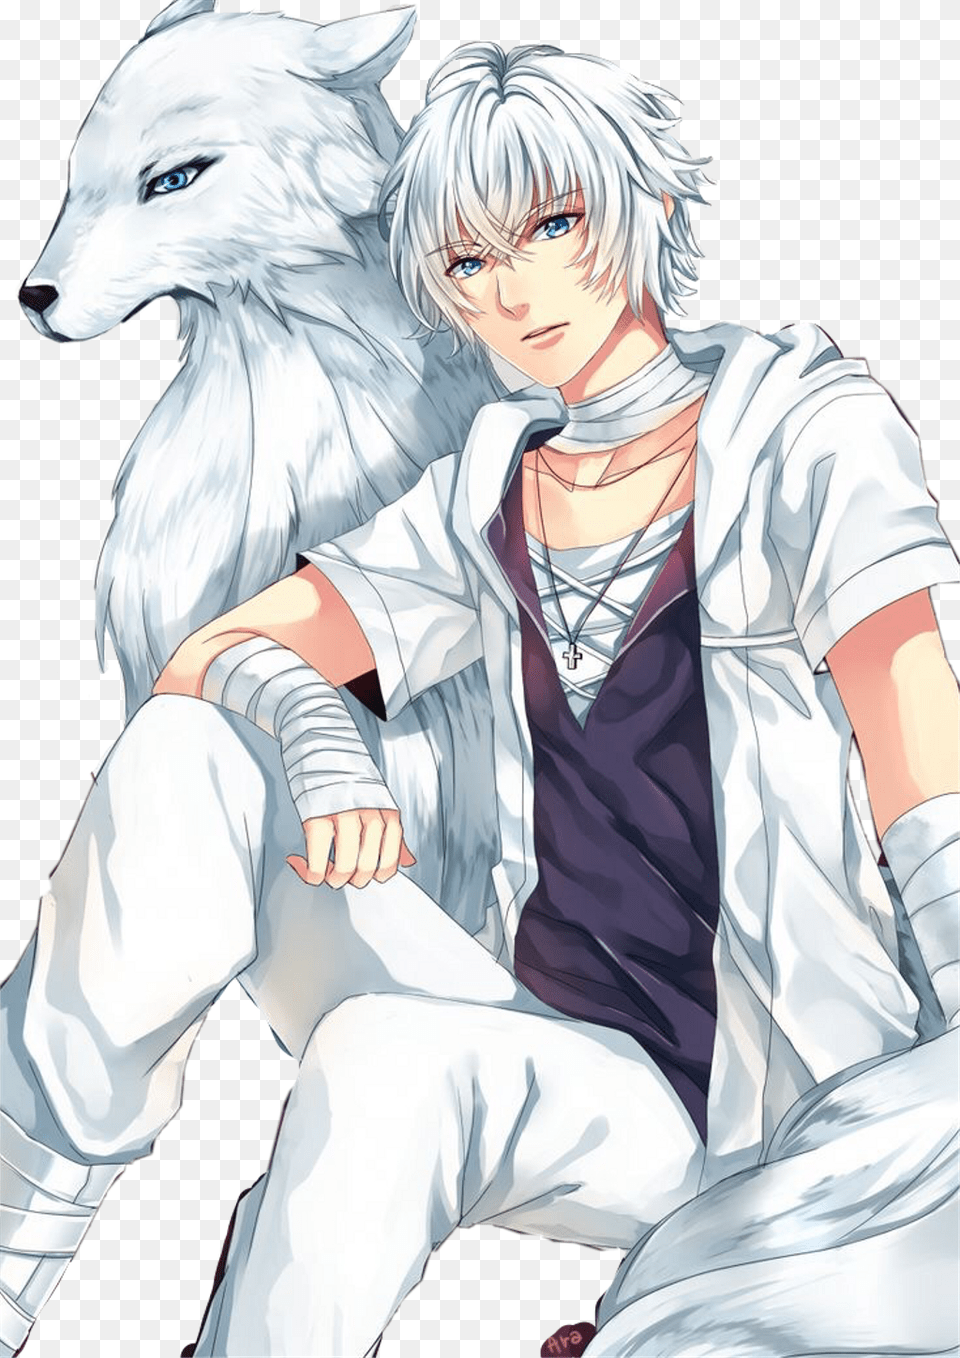 Cool Anime Wolf White Wolf Human Anime, Publication, Book, Comics, Adult Png Image